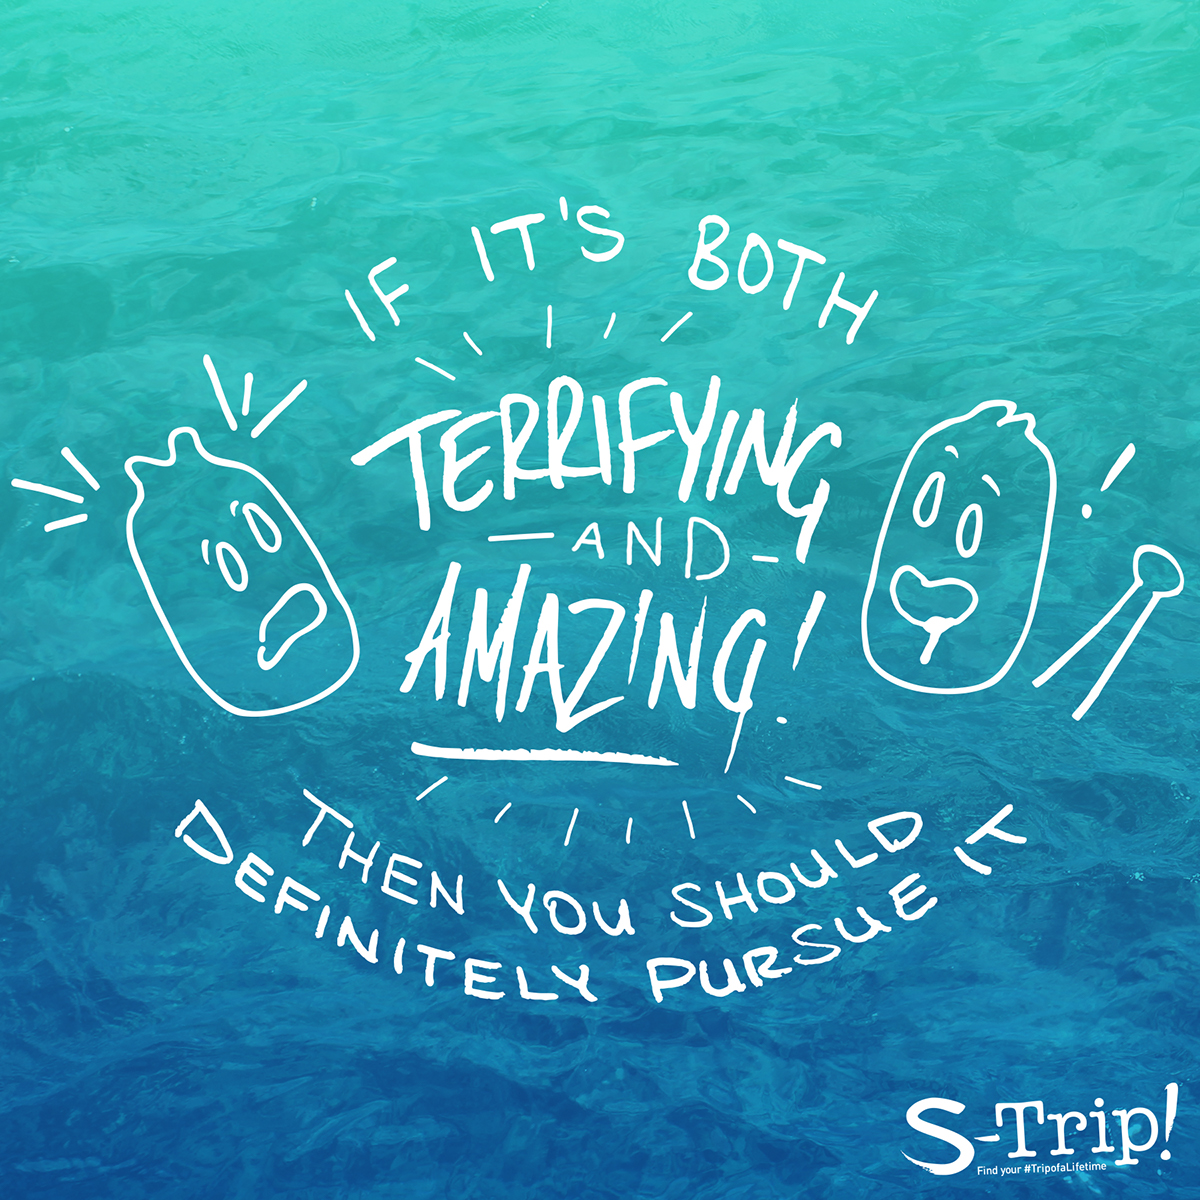 S-Trip! Breakaway Tours I Love Travel viral quotes